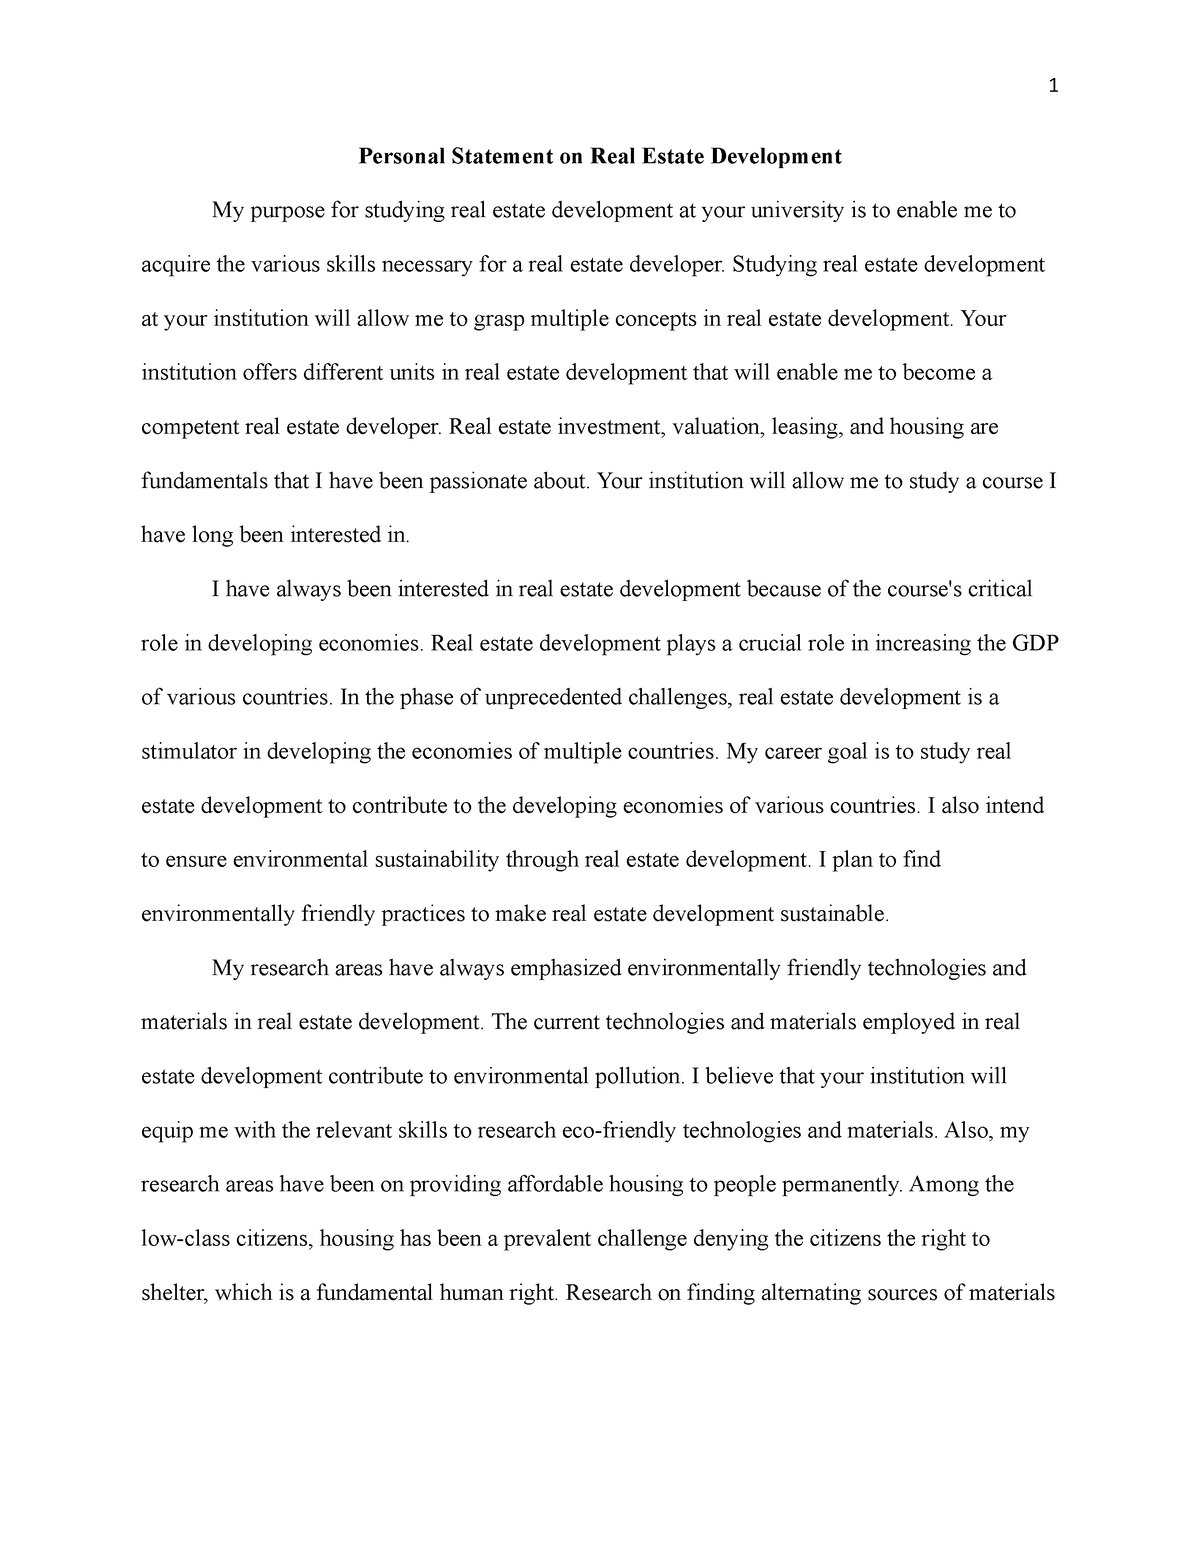 personal statement on real estate